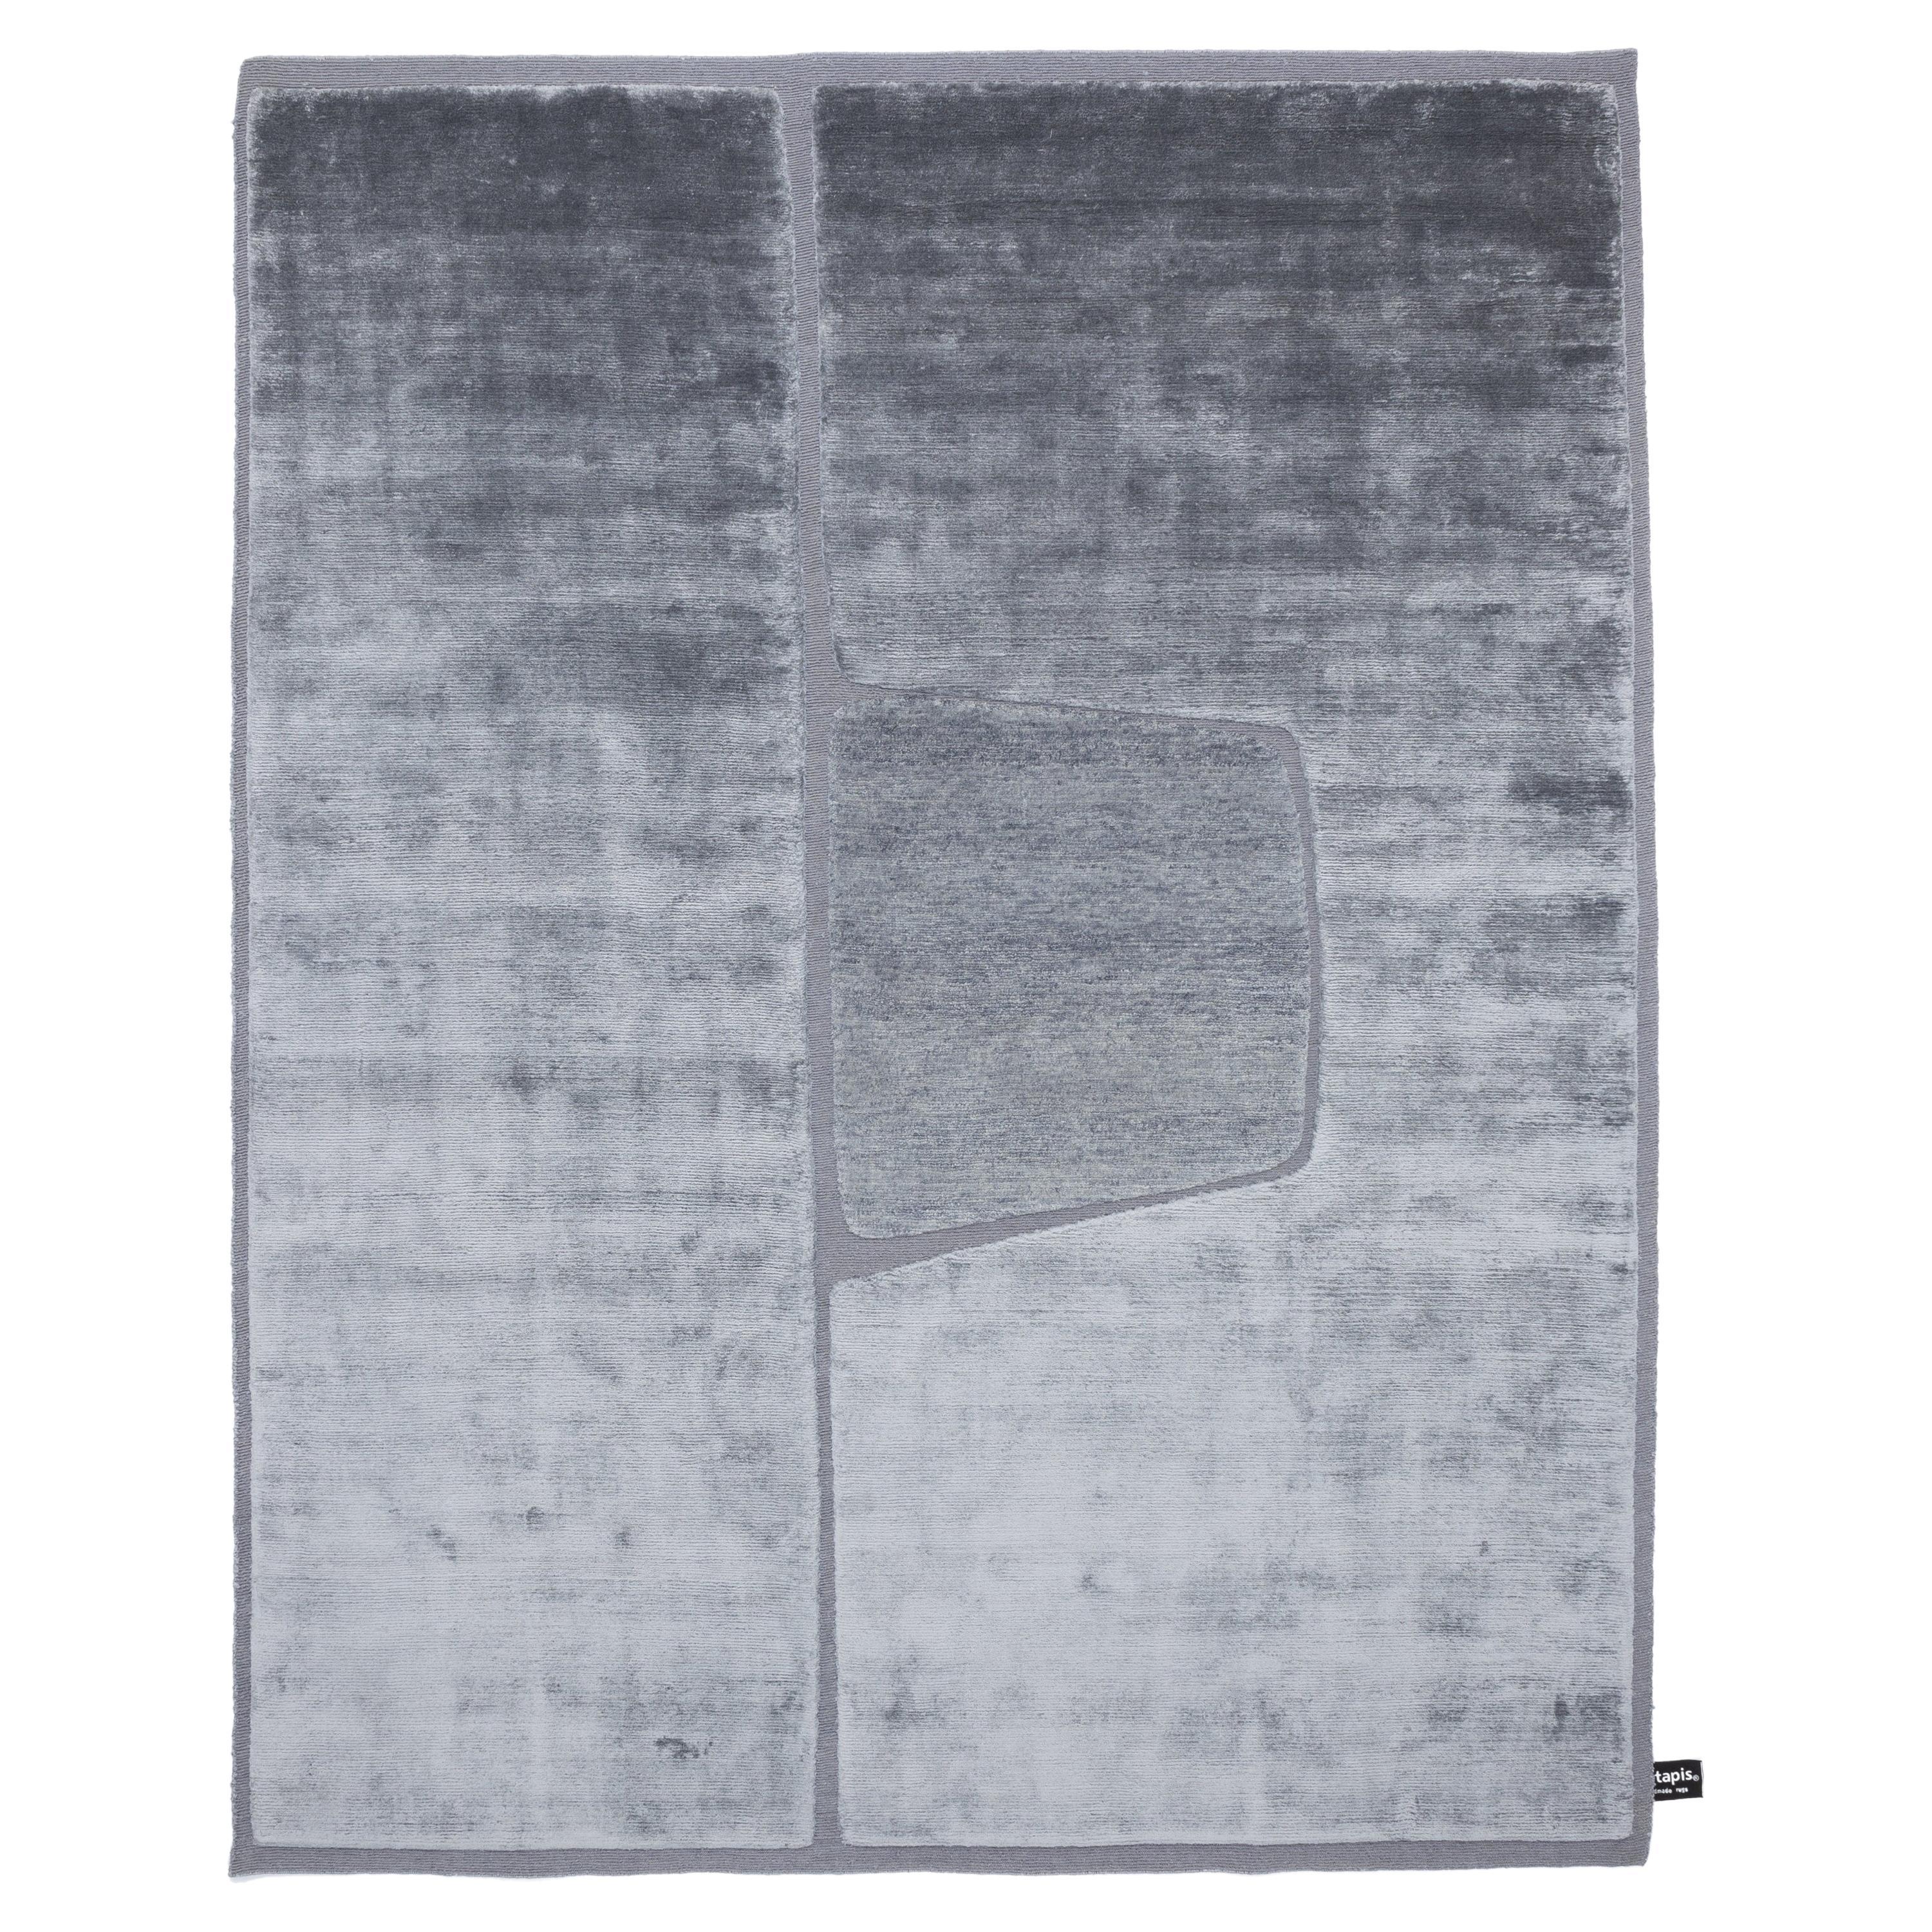 cc-tapis Cut Out Monocromo Rug Ice by A. Parisotto and M. Formenton